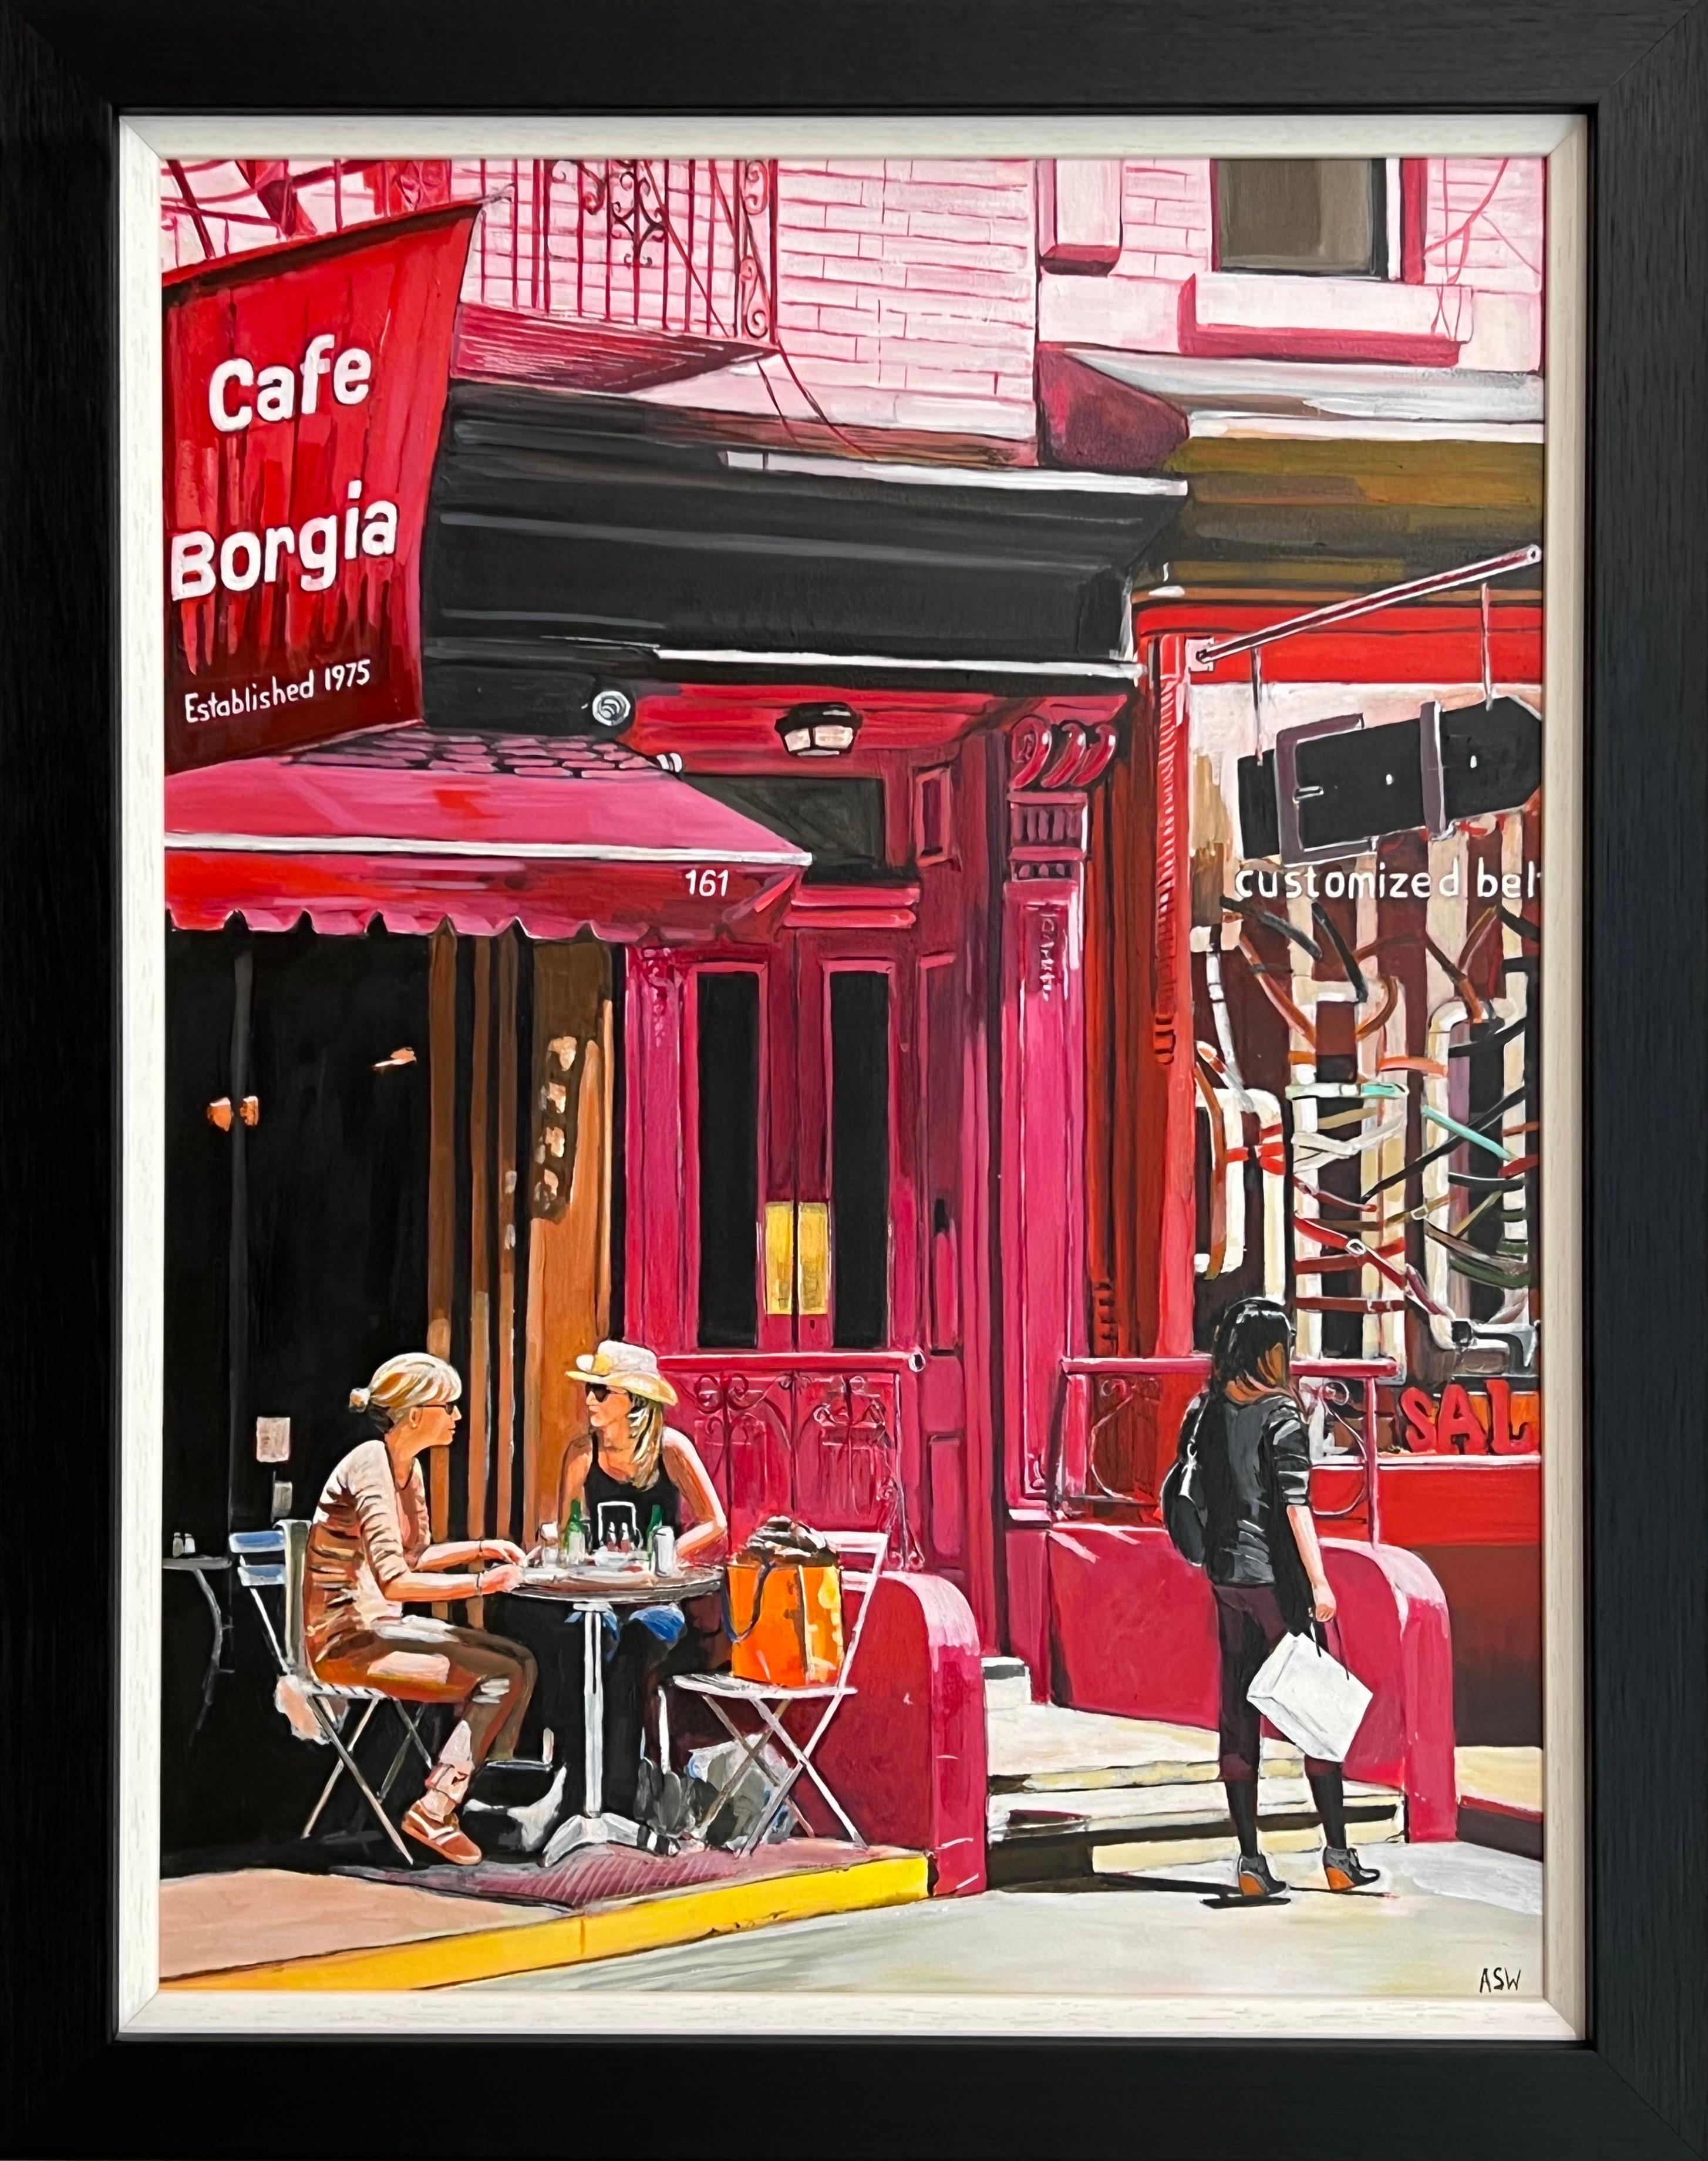 Angela Wakefield Figurative Painting - New York City Cafe Borgia with Female Figures by Contemporary British Artist